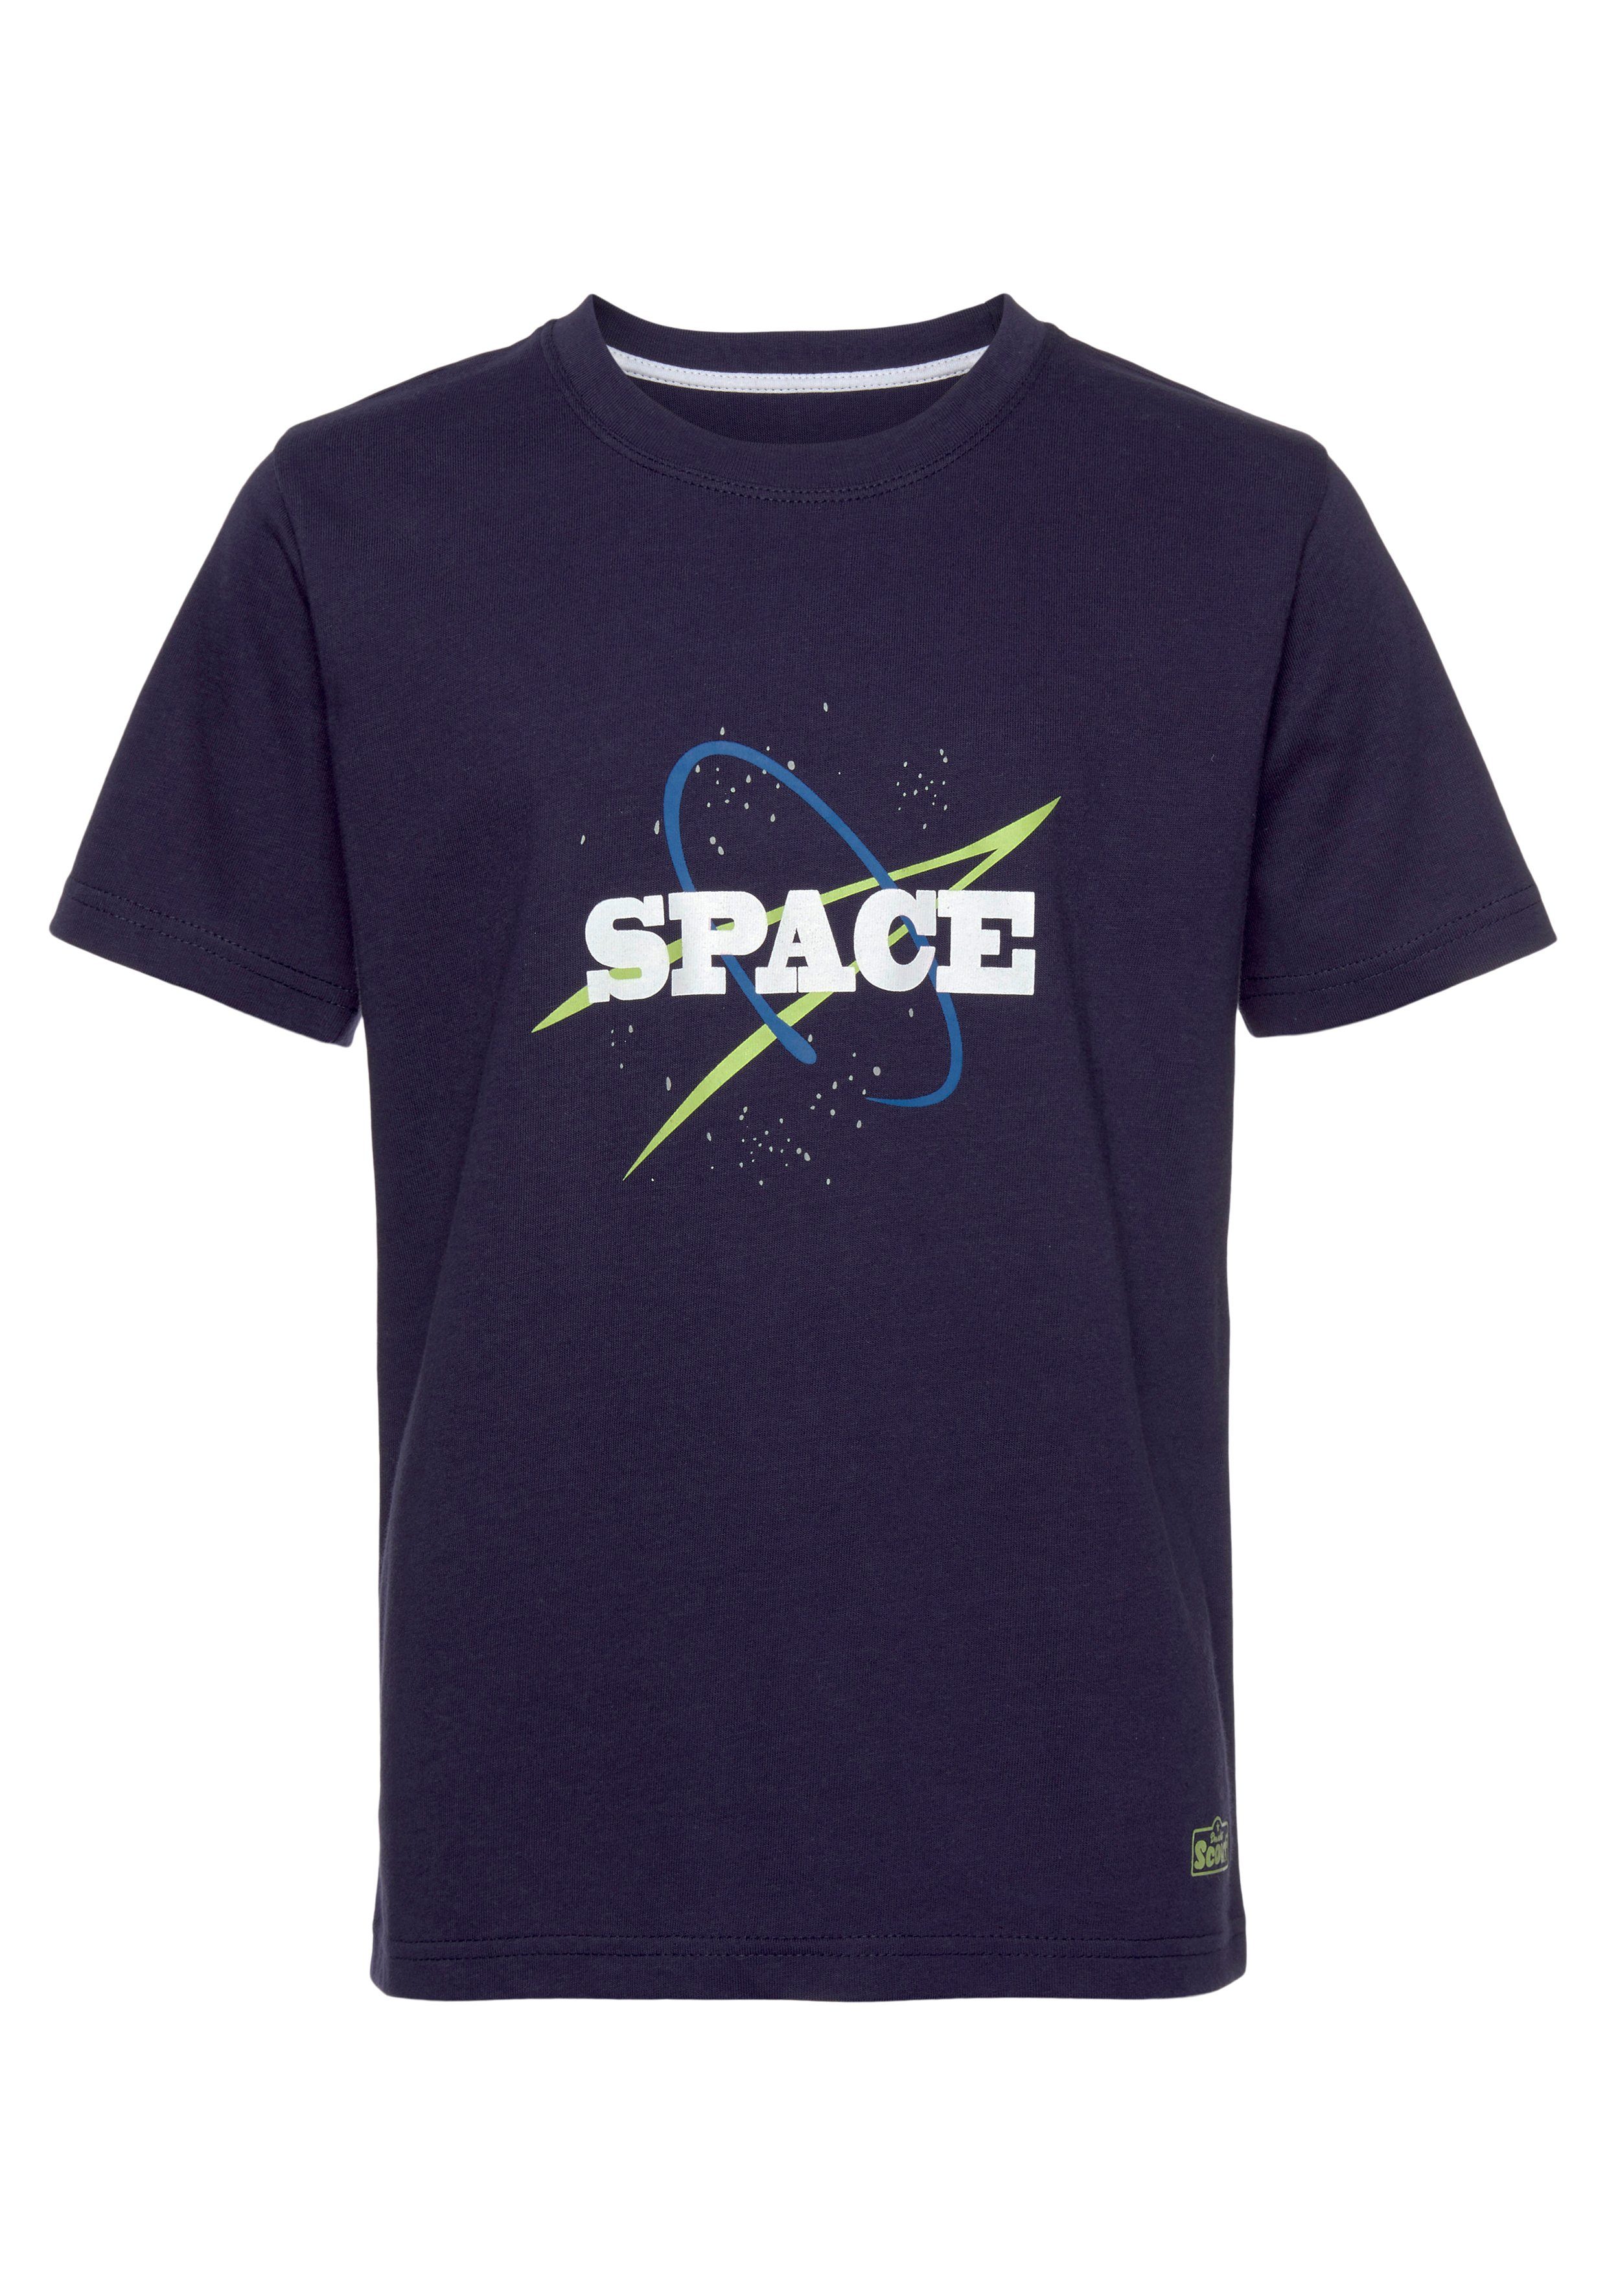 Bio-Baumwolle 2er-Pack) Scout SPACE aus T-Shirt (Packung,